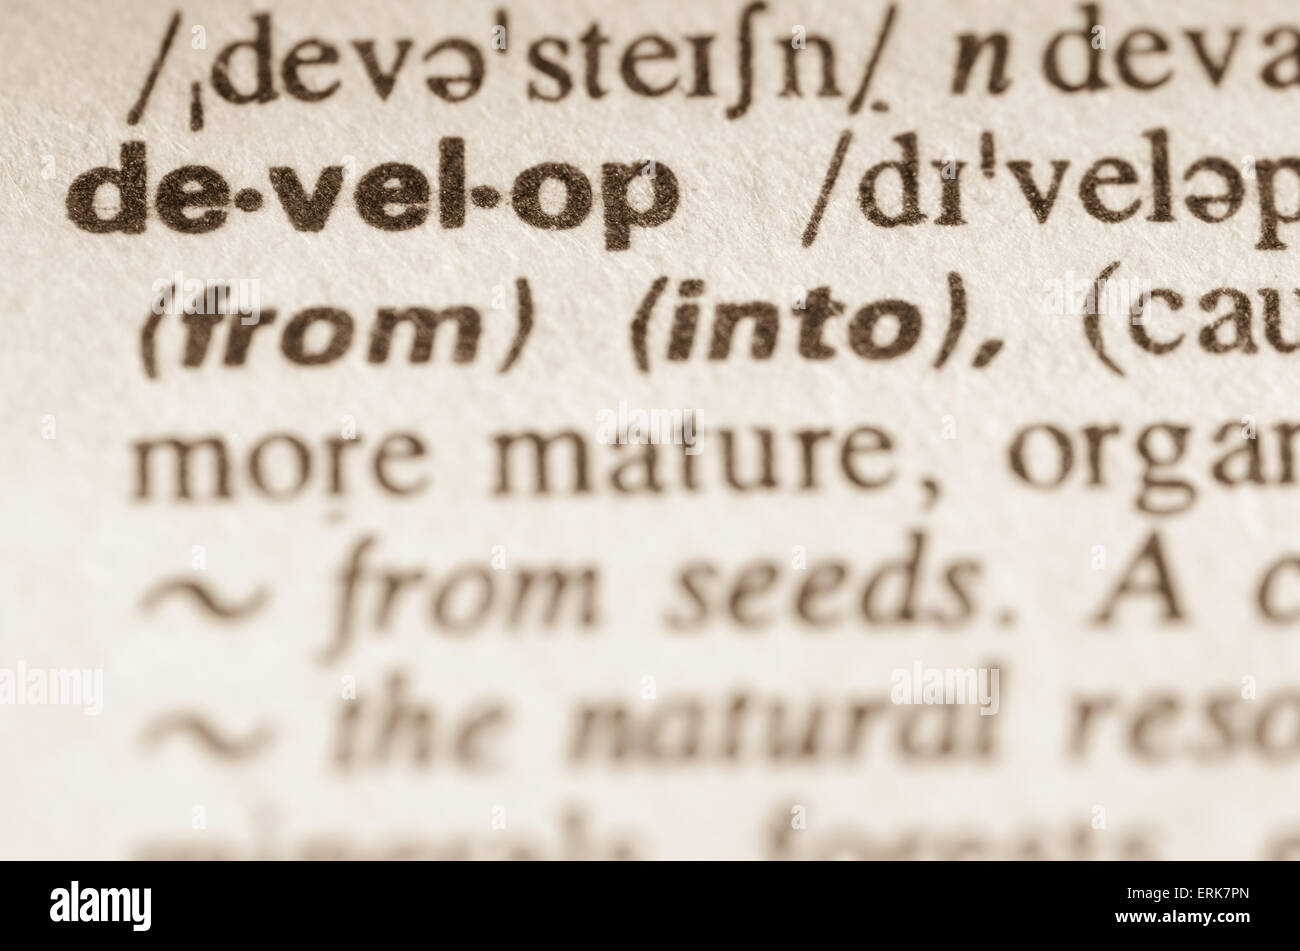 Definition of word develop in dictionary Stock Photo